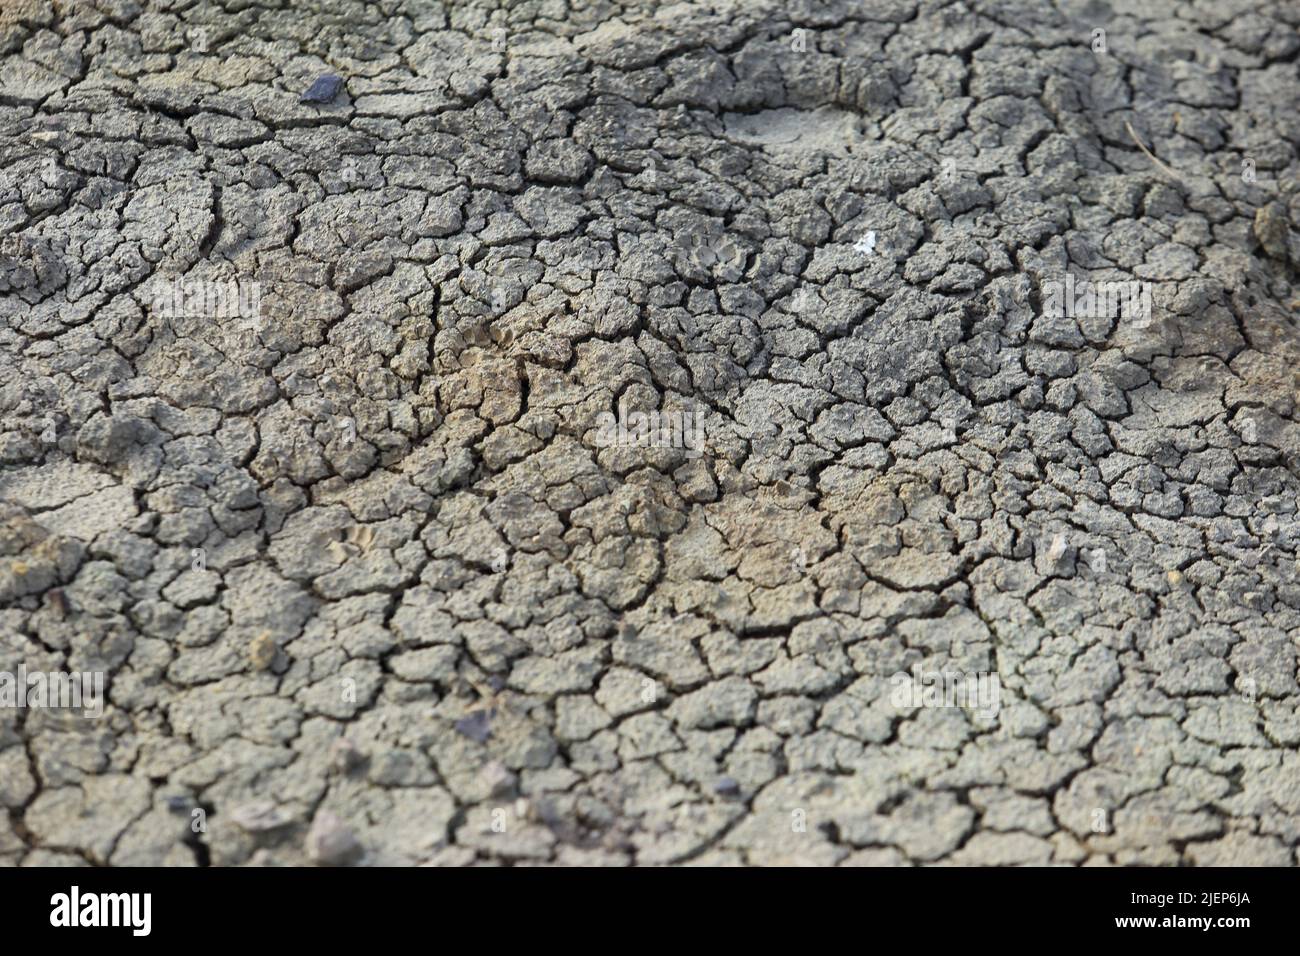 drought - dry land without water Stock Photo